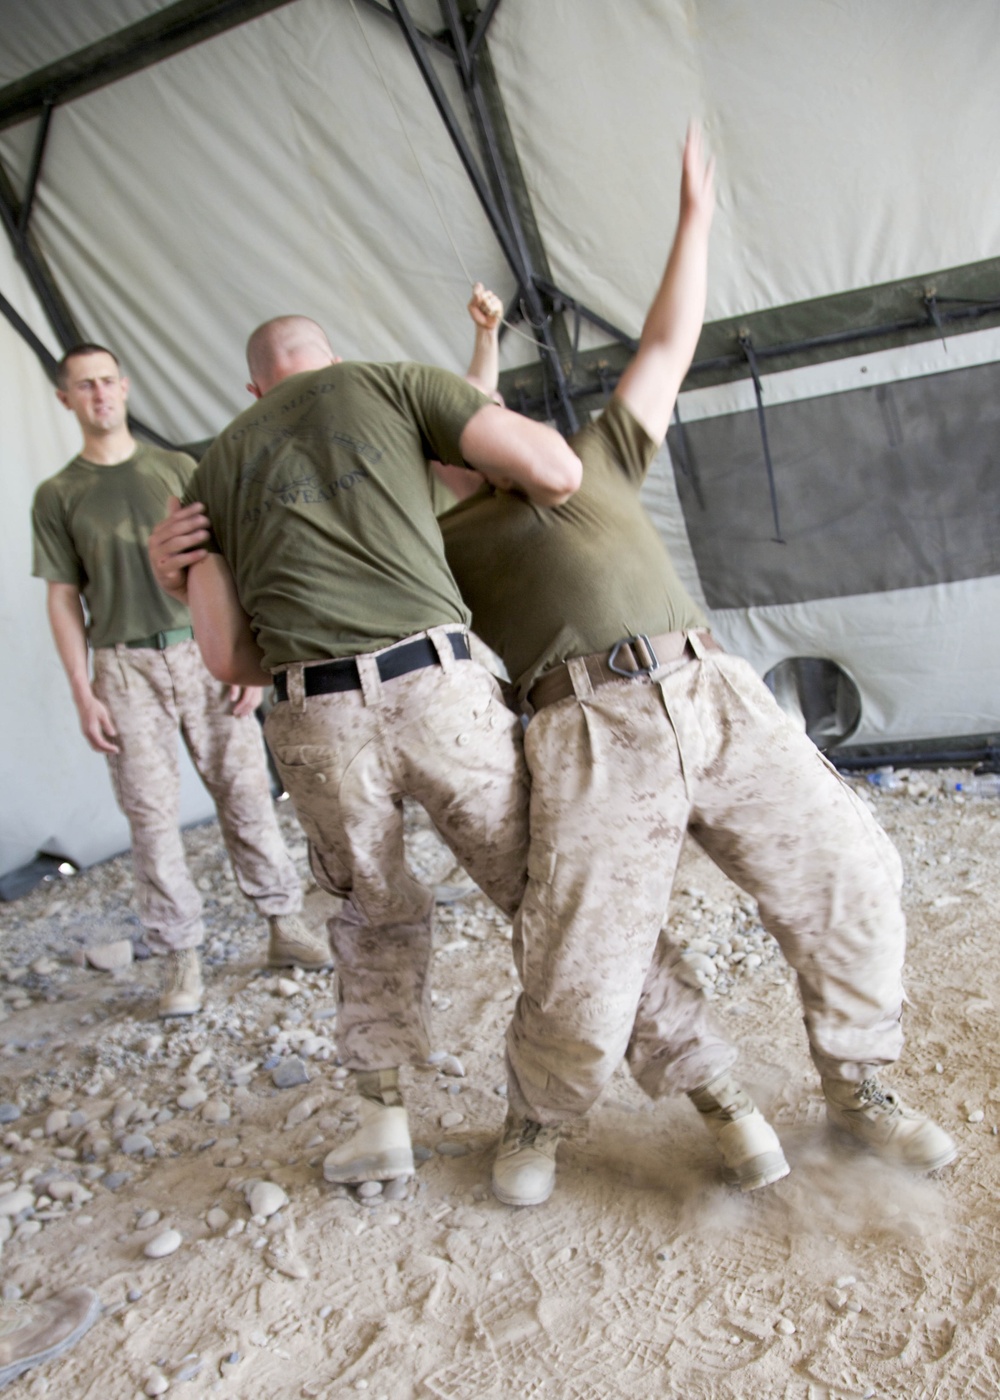 Marines with 3/4 conduct MCMAP training